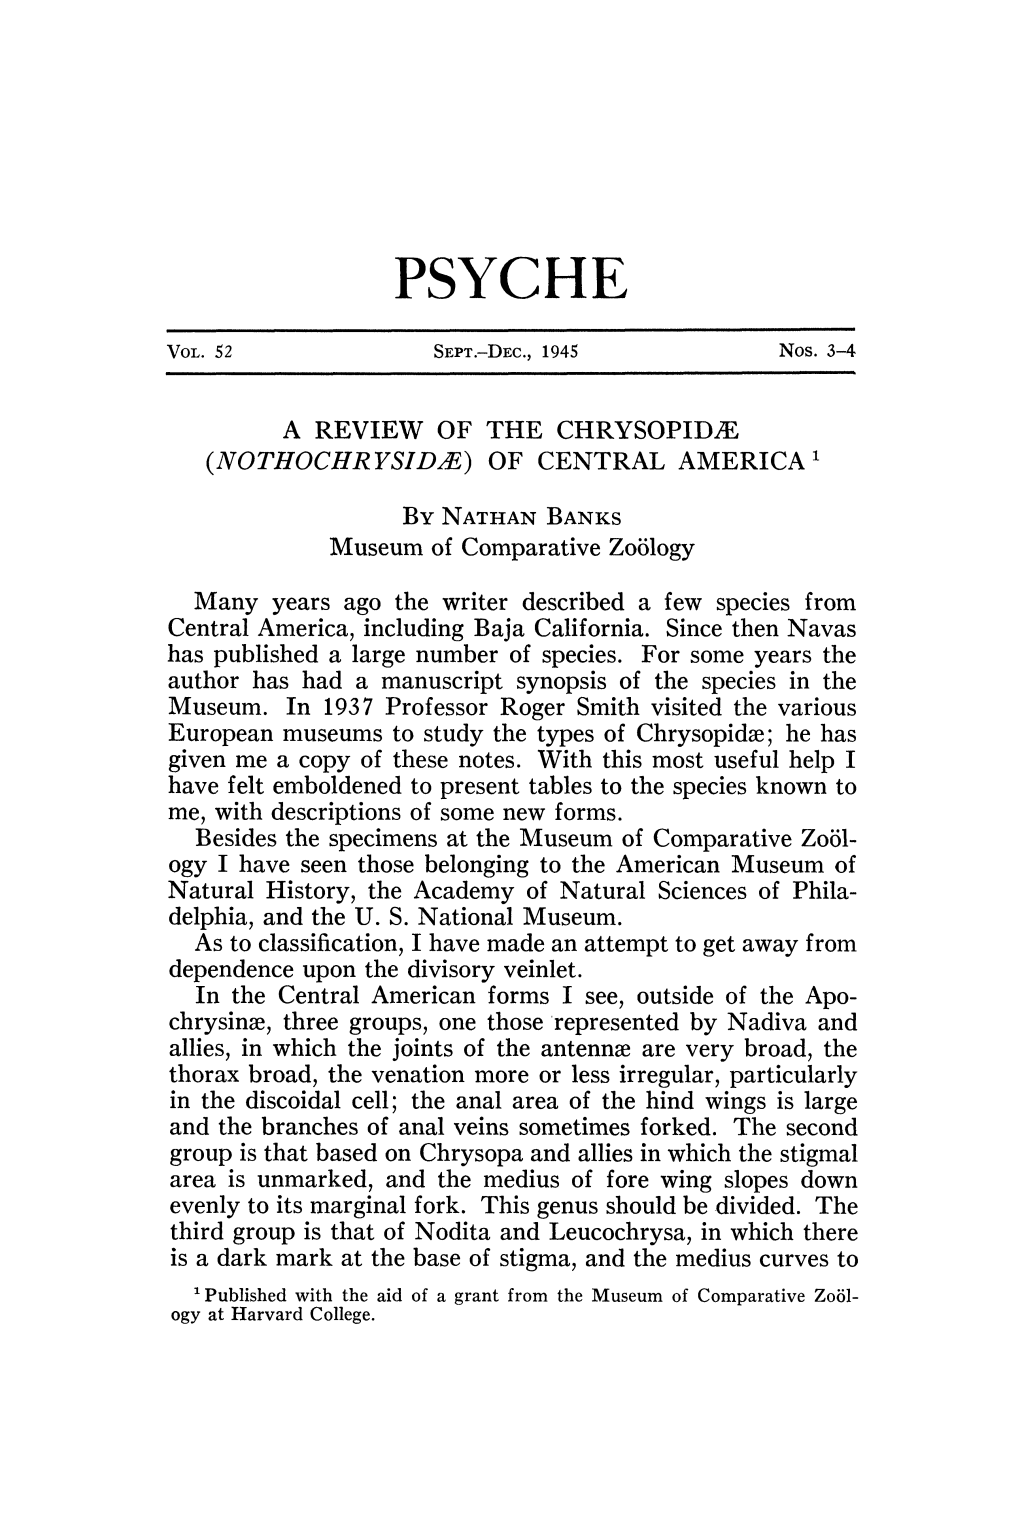 A Review of the Chrysopidæ (Nothochrysidæ) of Central America